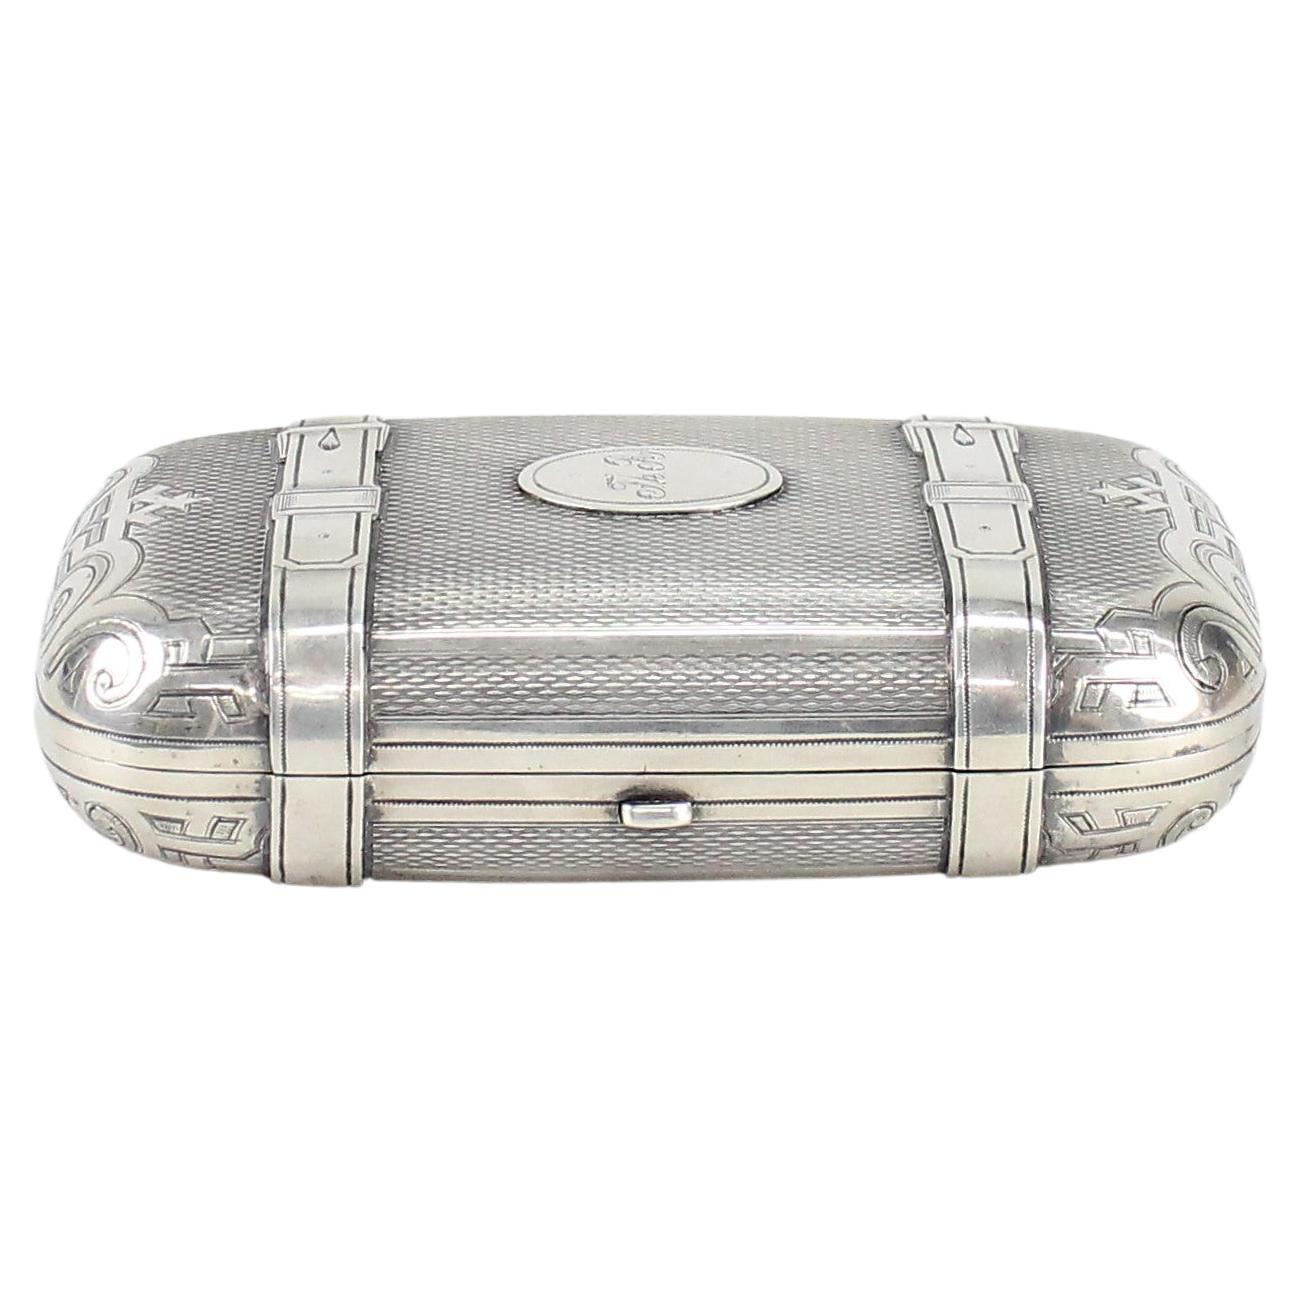 Mikhail Yakovlevich Isakov, St Petersburg.
A Russian trompe l'oil silver cigar case in the form of a suitcase.
Hallmarked twice, for Russian silver 84 and makers marks.

Late 19th century. The case is engraved '1893'.
High-quality work.
Really